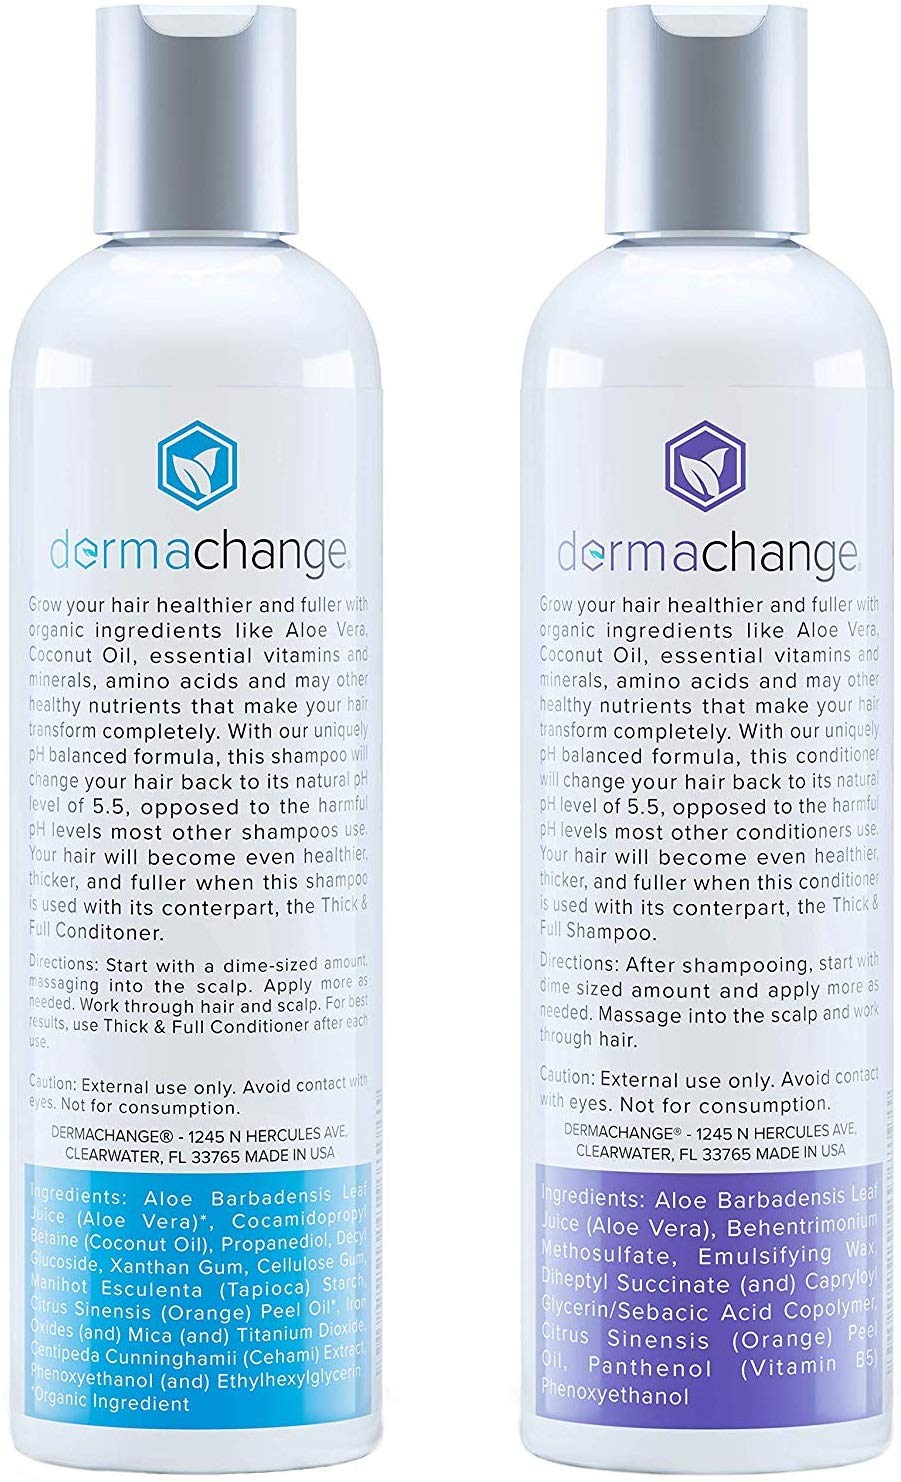 Natural Hair Growth Shampoo and Conditioner Set - Sulfate Free, Vegan, Thicker Hair Regrowth with Vitamins - Hair Loss & Thinning Products - Curly or Color Treated Hair - For Men and Women (8oz)